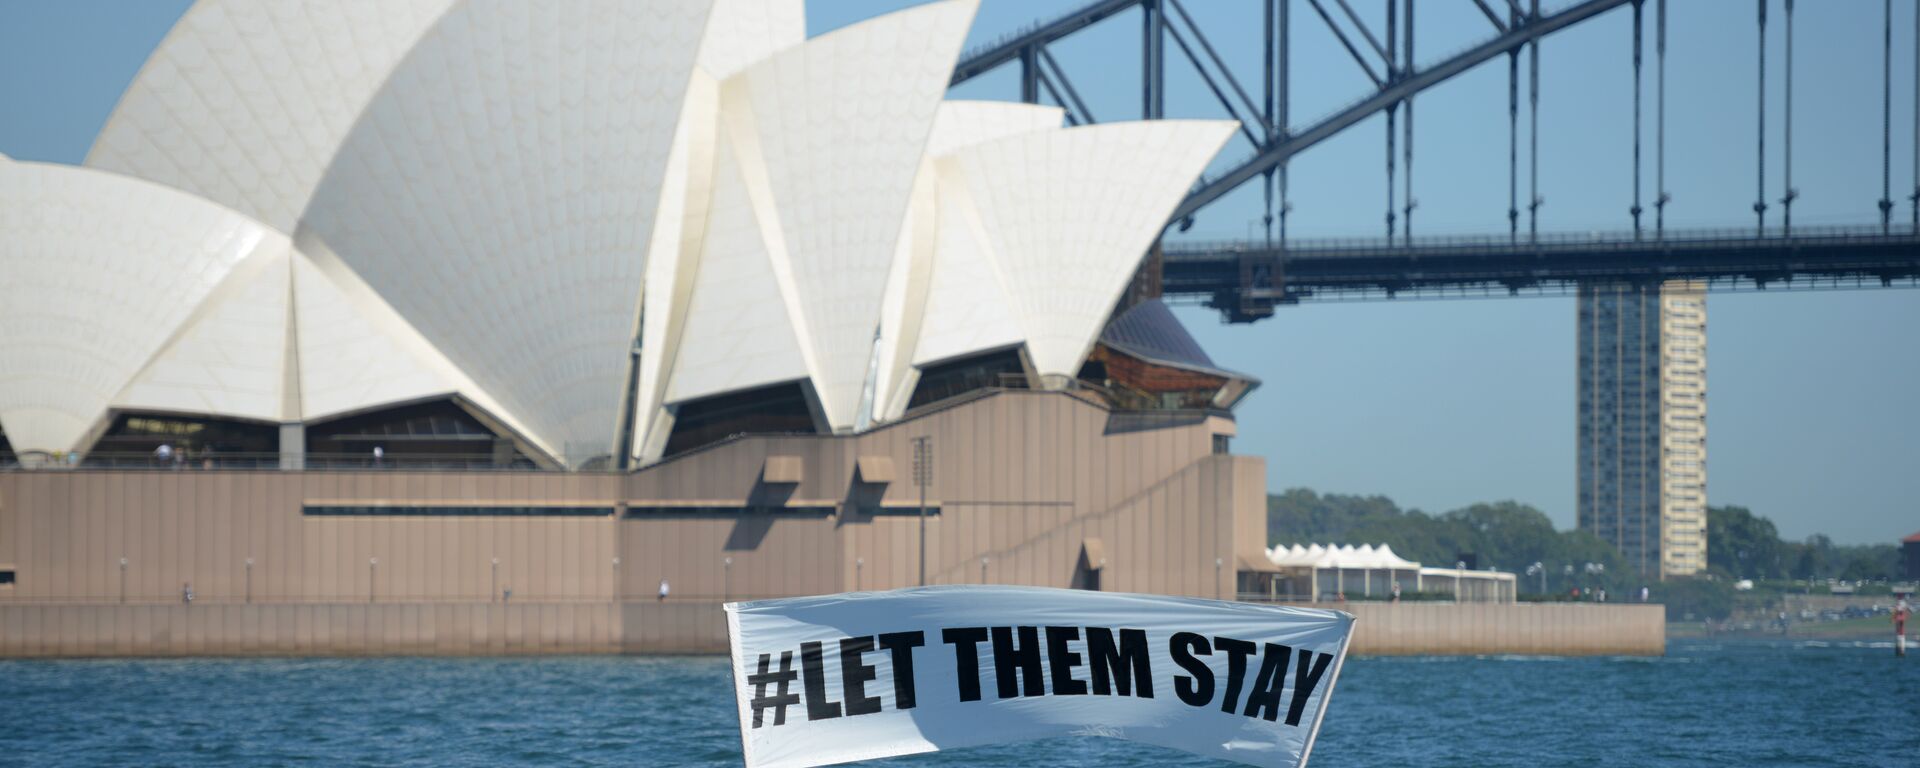 Members of the environmental group Greenpeace hold up a sign that reads #LET THEM STAY in front of the Opera House in Sydney on February 14, 2016. - Sputnik International, 1920, 13.02.2017